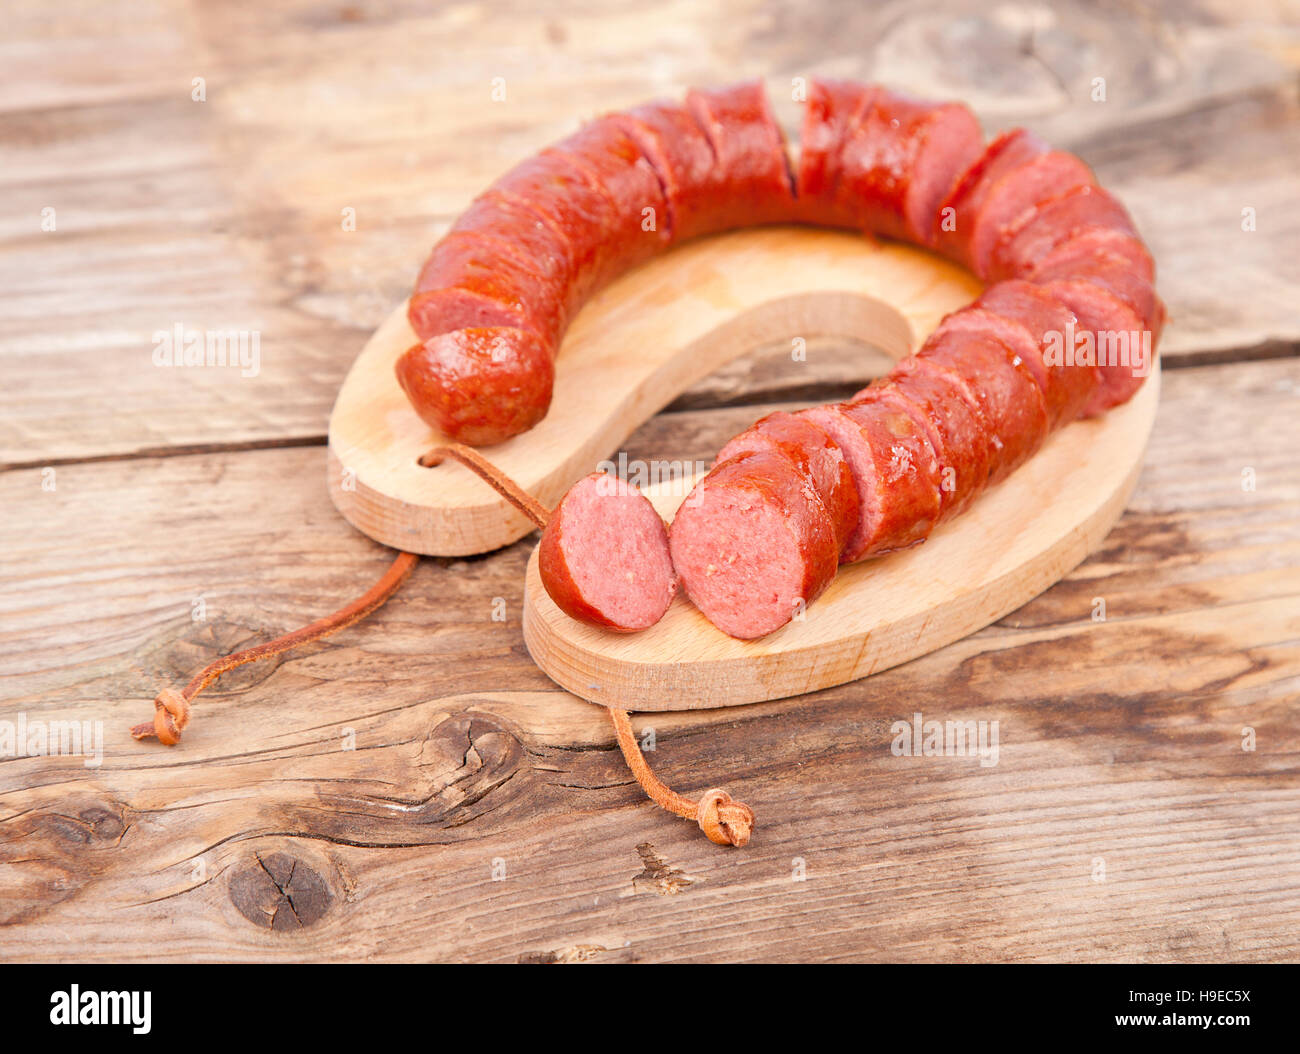 Traditional Dutch smoked sausage called Rookworst on wooden background Stock Photo